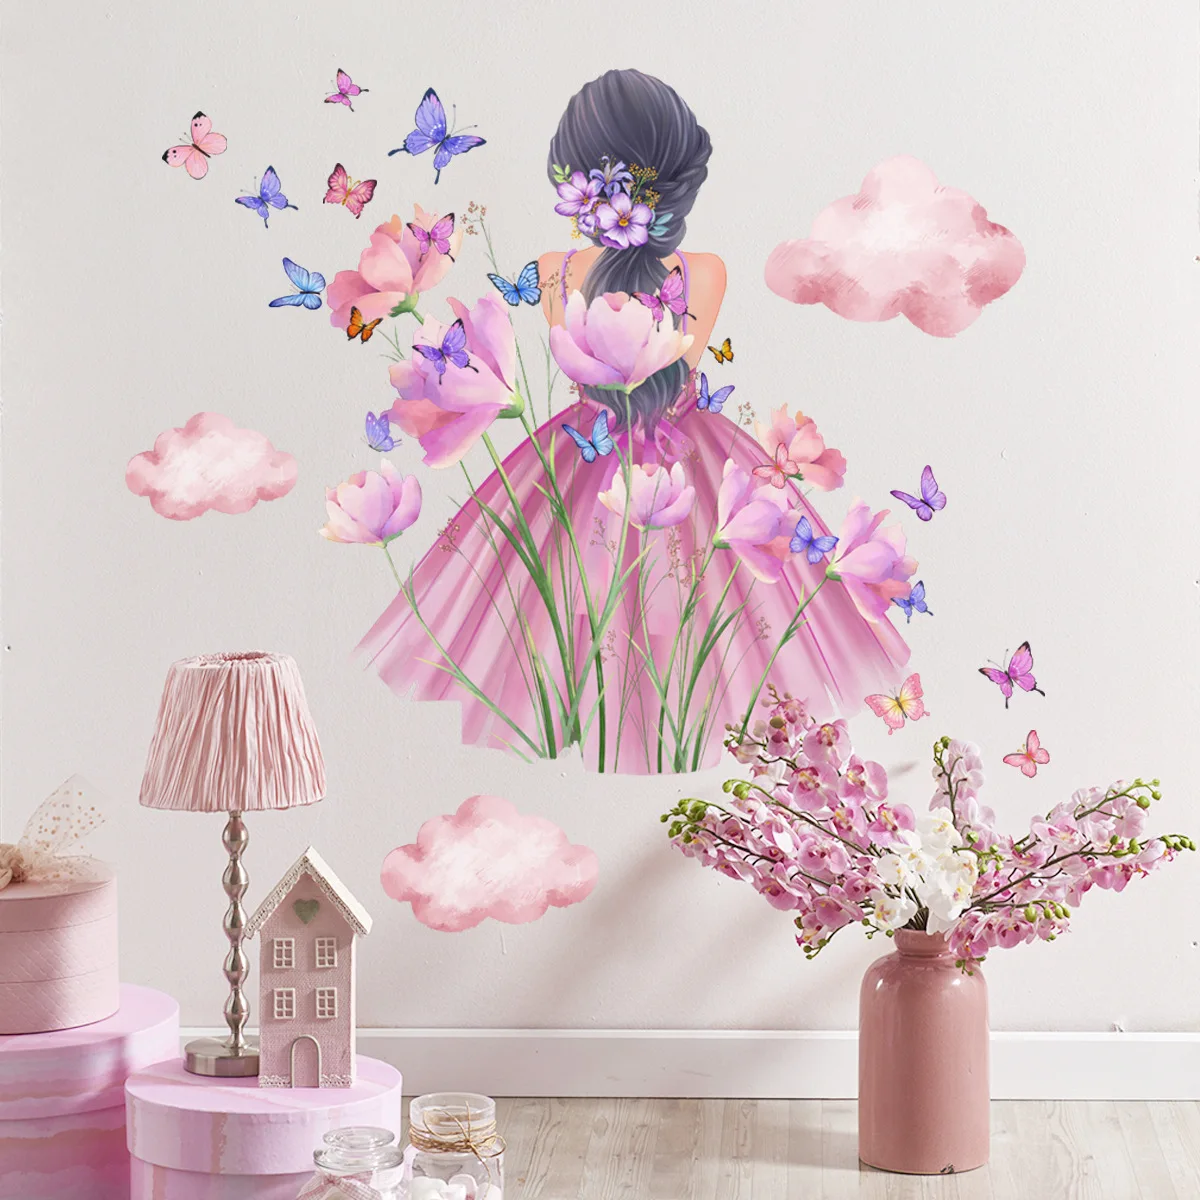 Cartoon Girl Butterfly Cloud Wall Sticker Self-adhesive Removable Vinyl PVC Home Decor for Living Room Bedroom